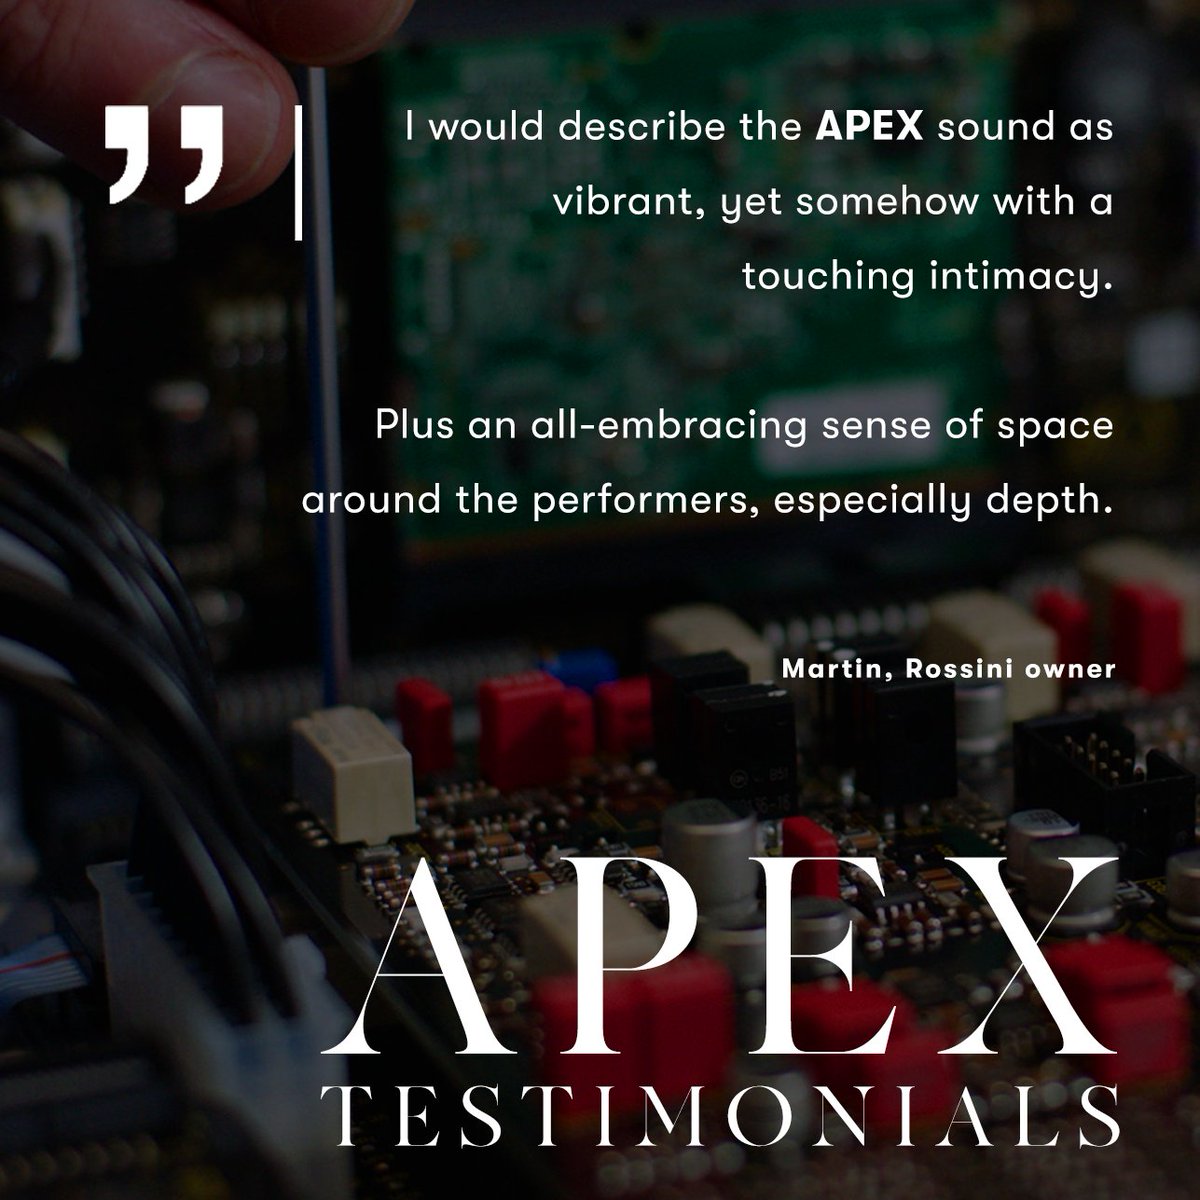 It’s now easier than ever to learn more about APEX upgrades with our dedicated web page. Find reviews, owner testimonials & info on the upgrade process at dcsaudio.com/apex-upgrade #hifi #audiophile #dCSAPEXUpgrade